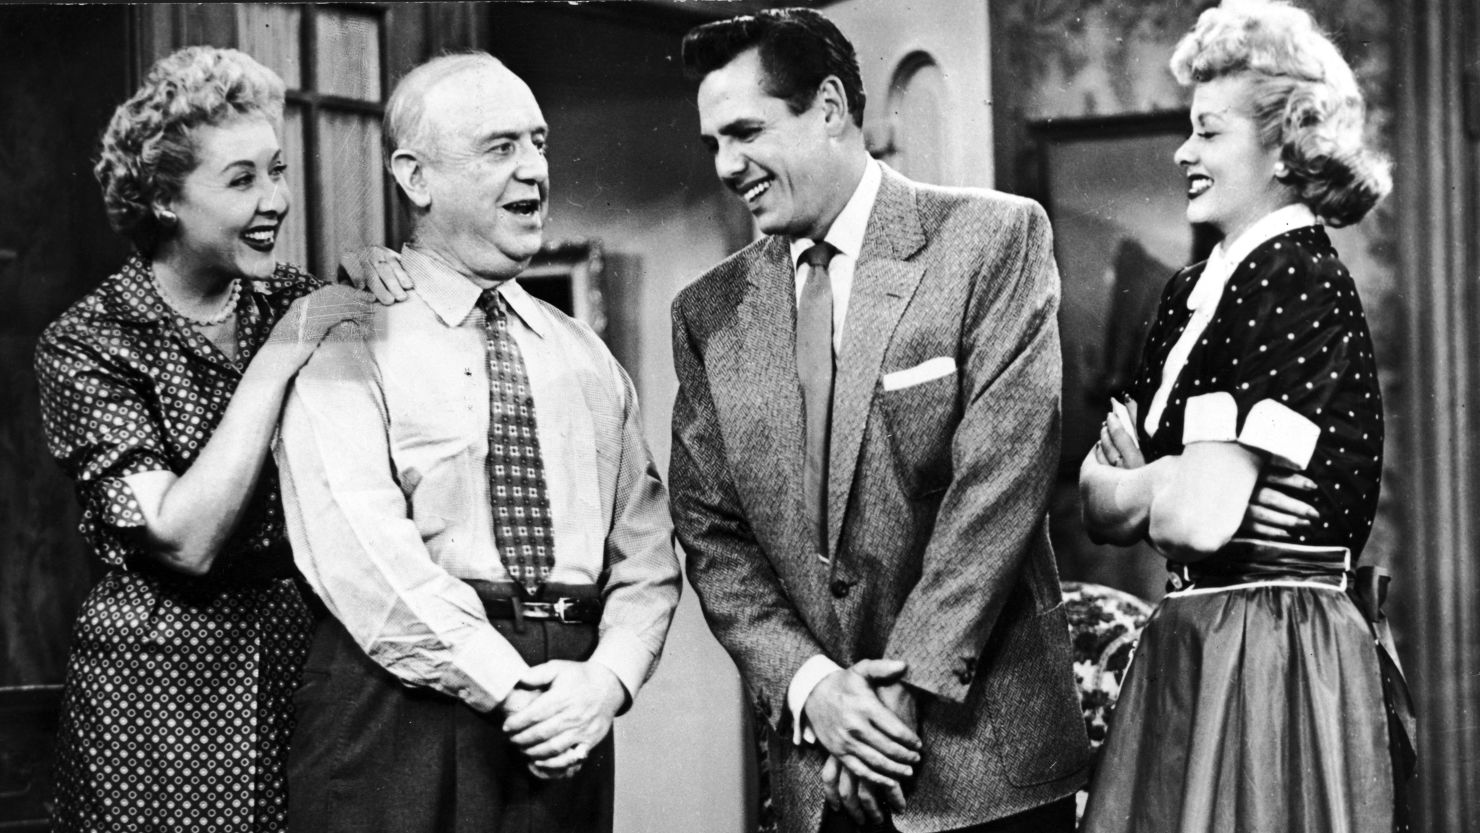 "I Love Lucy" pioneered the multicamera approach to situation comedies.